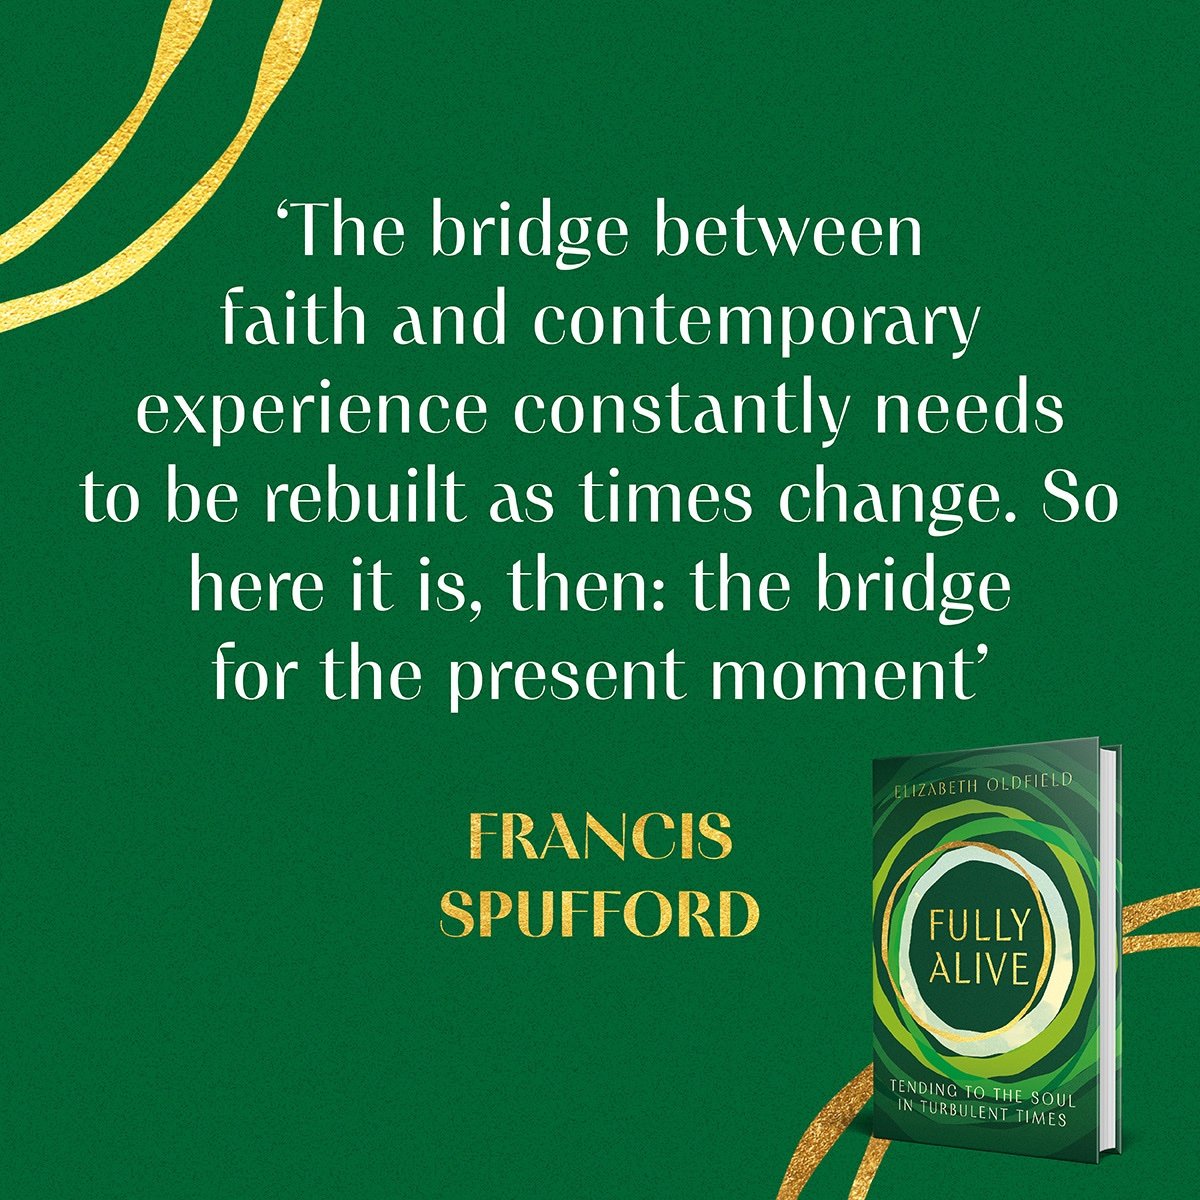 The extraordinary and soulful #FullyAlive by @ESOldfield publishes today, and is available in all good bookshops ✨seek solace in these turbulent times from a gentle, honest, generous and FUNNY voice ✨ Francis Spufford agrees with us. @AgentSophieL